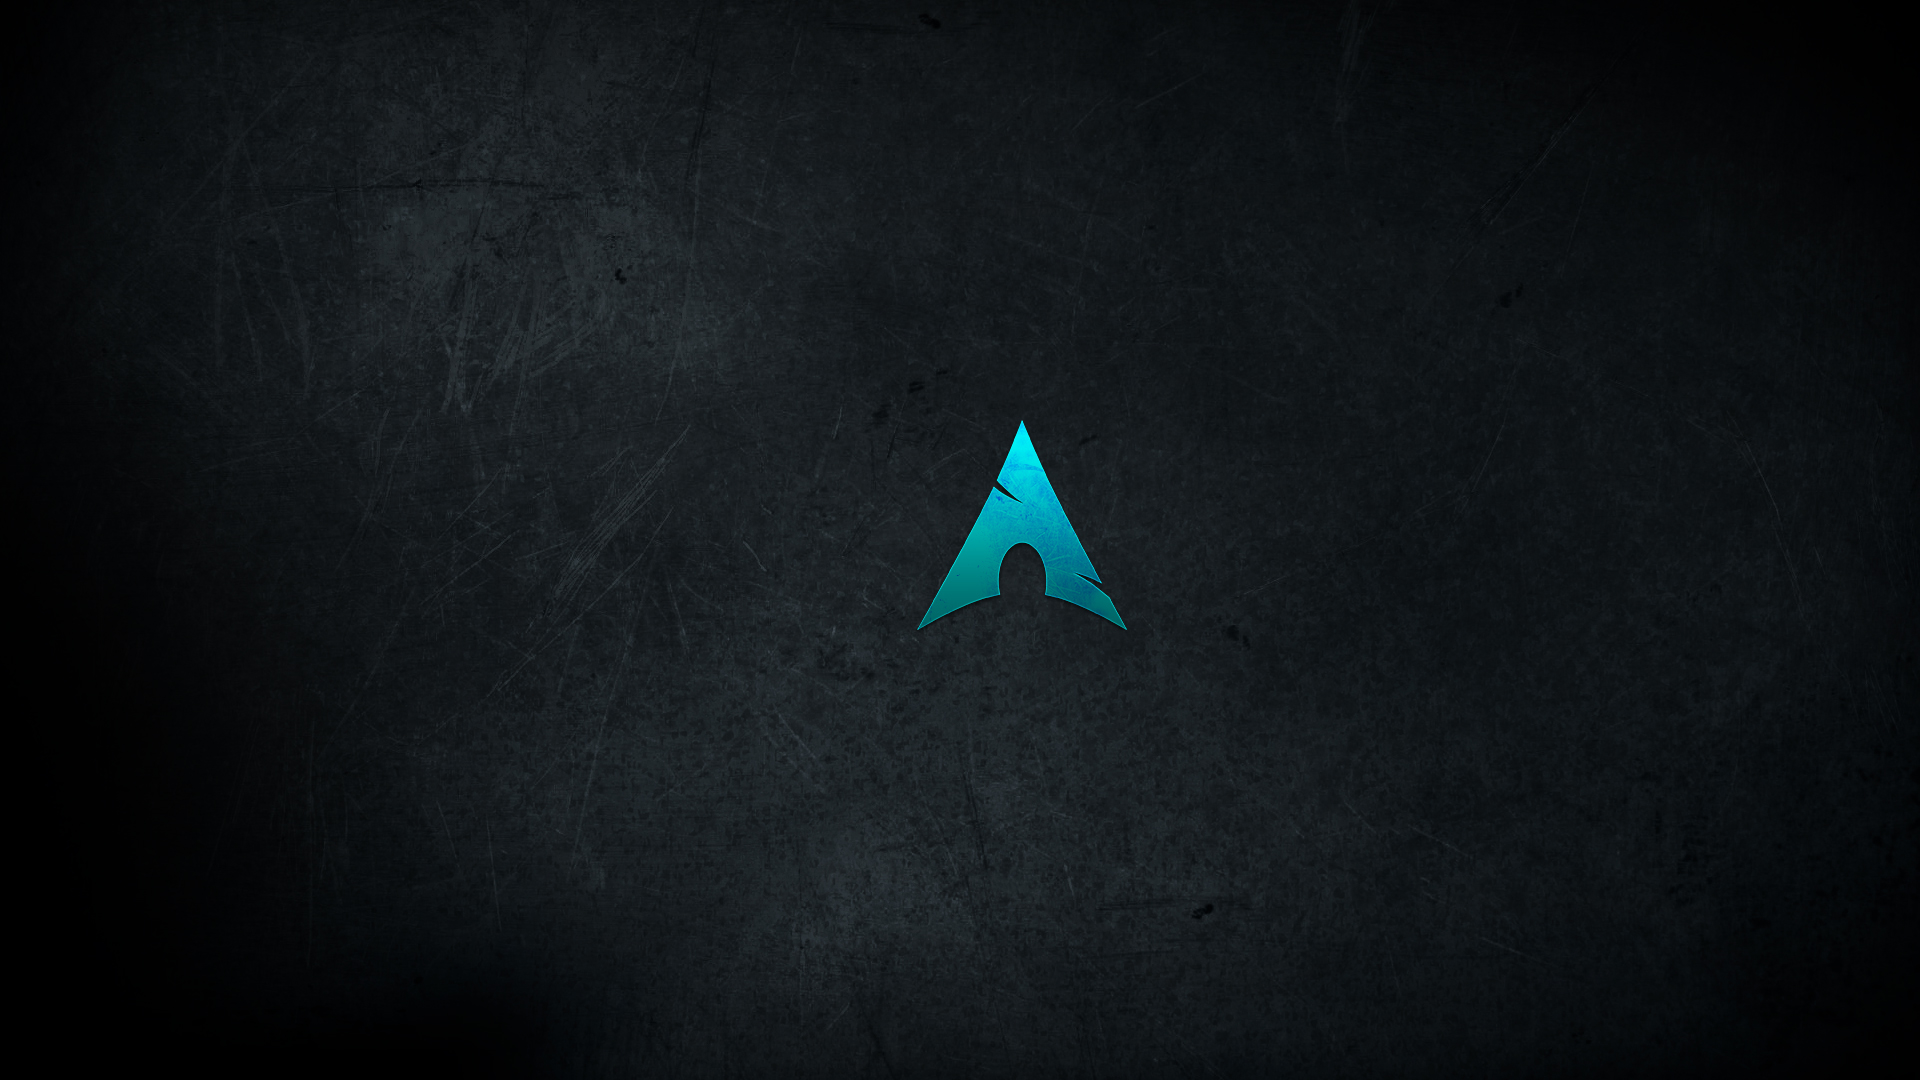 minimalistic_arch_linux_wallpaper_by_malkowitch-dahpghs.jpg